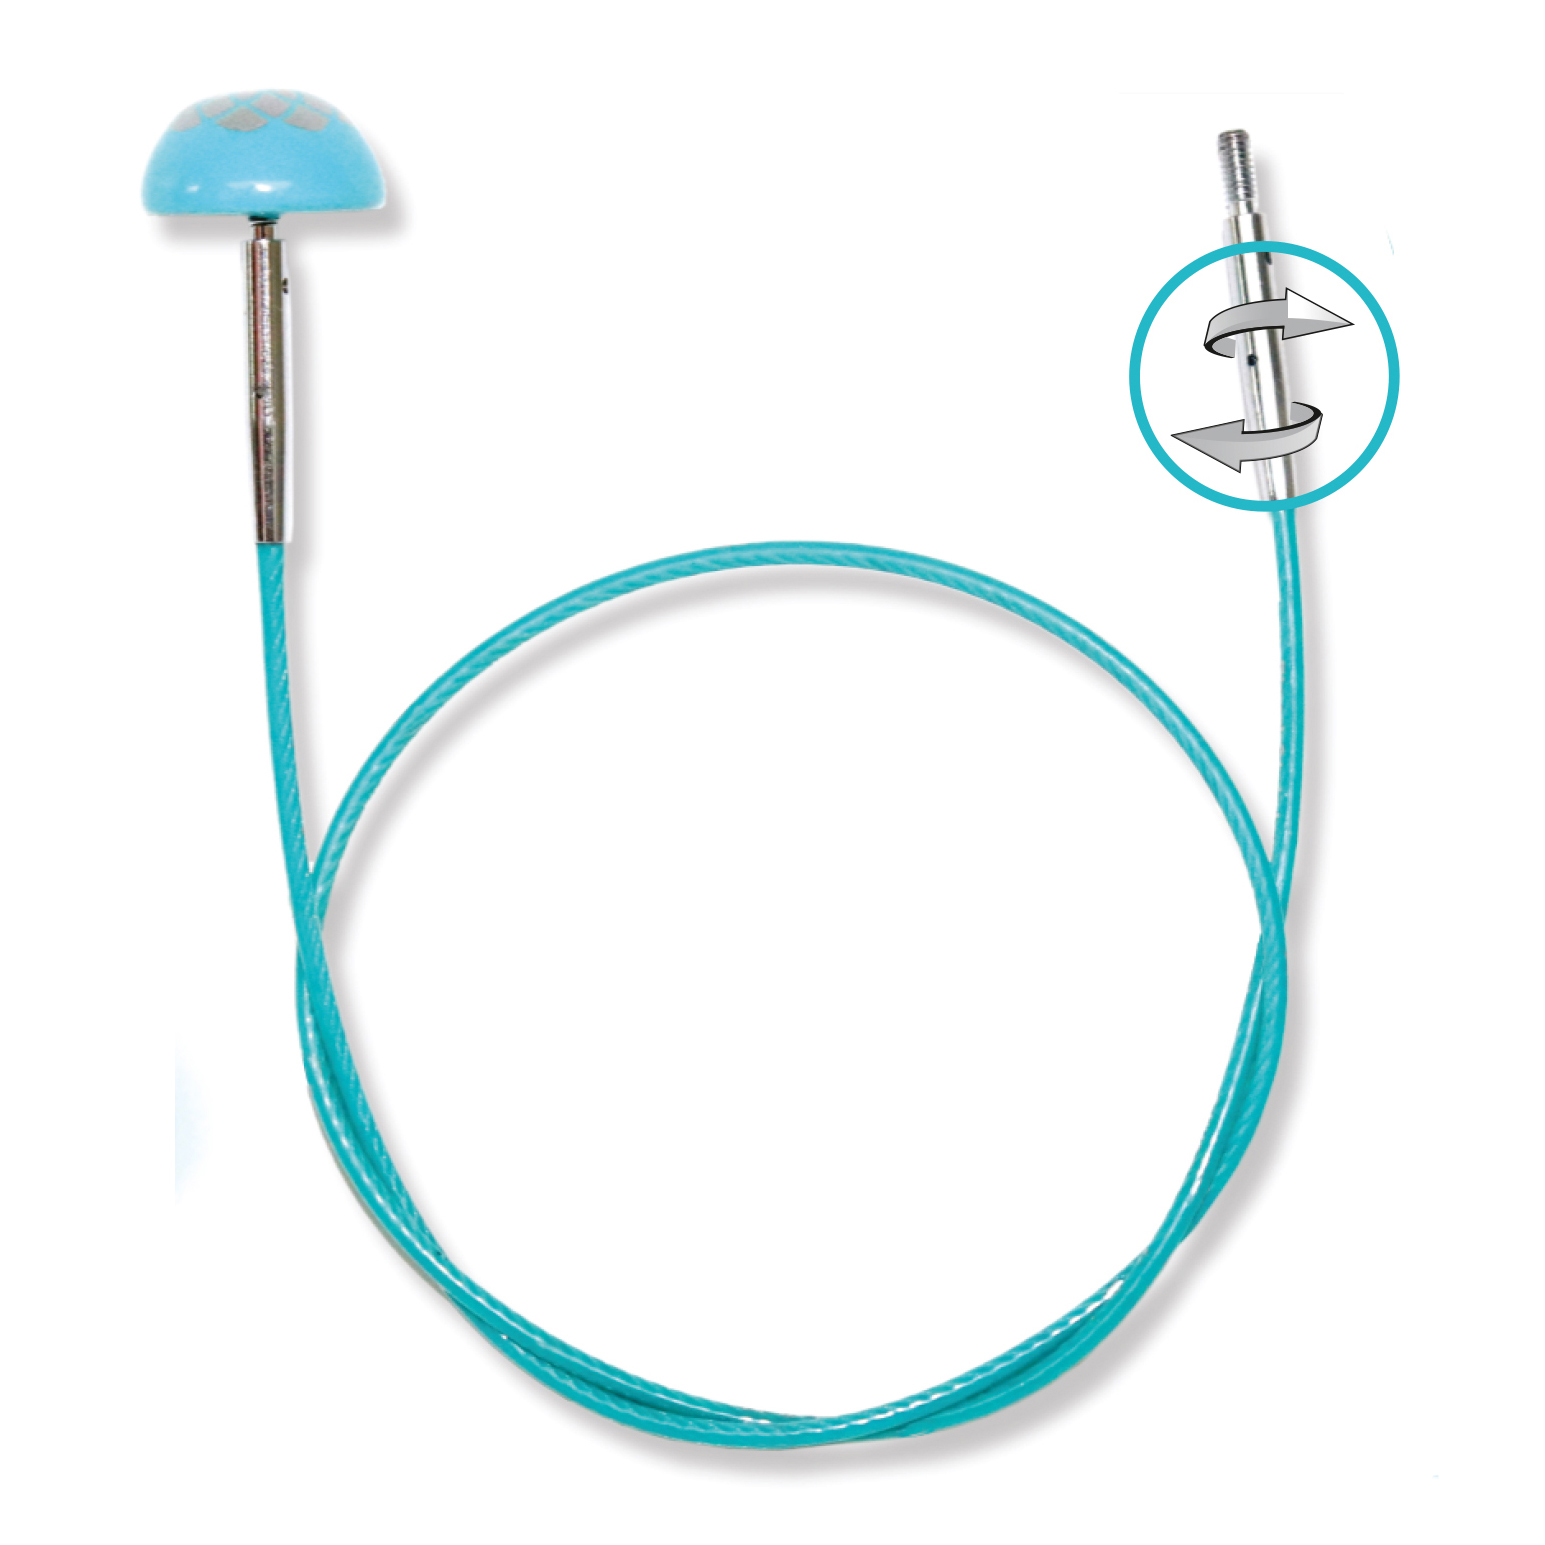 KnitPro: The Mindful Collection: 360° Swivel Cable: Interchangeable: 20cm